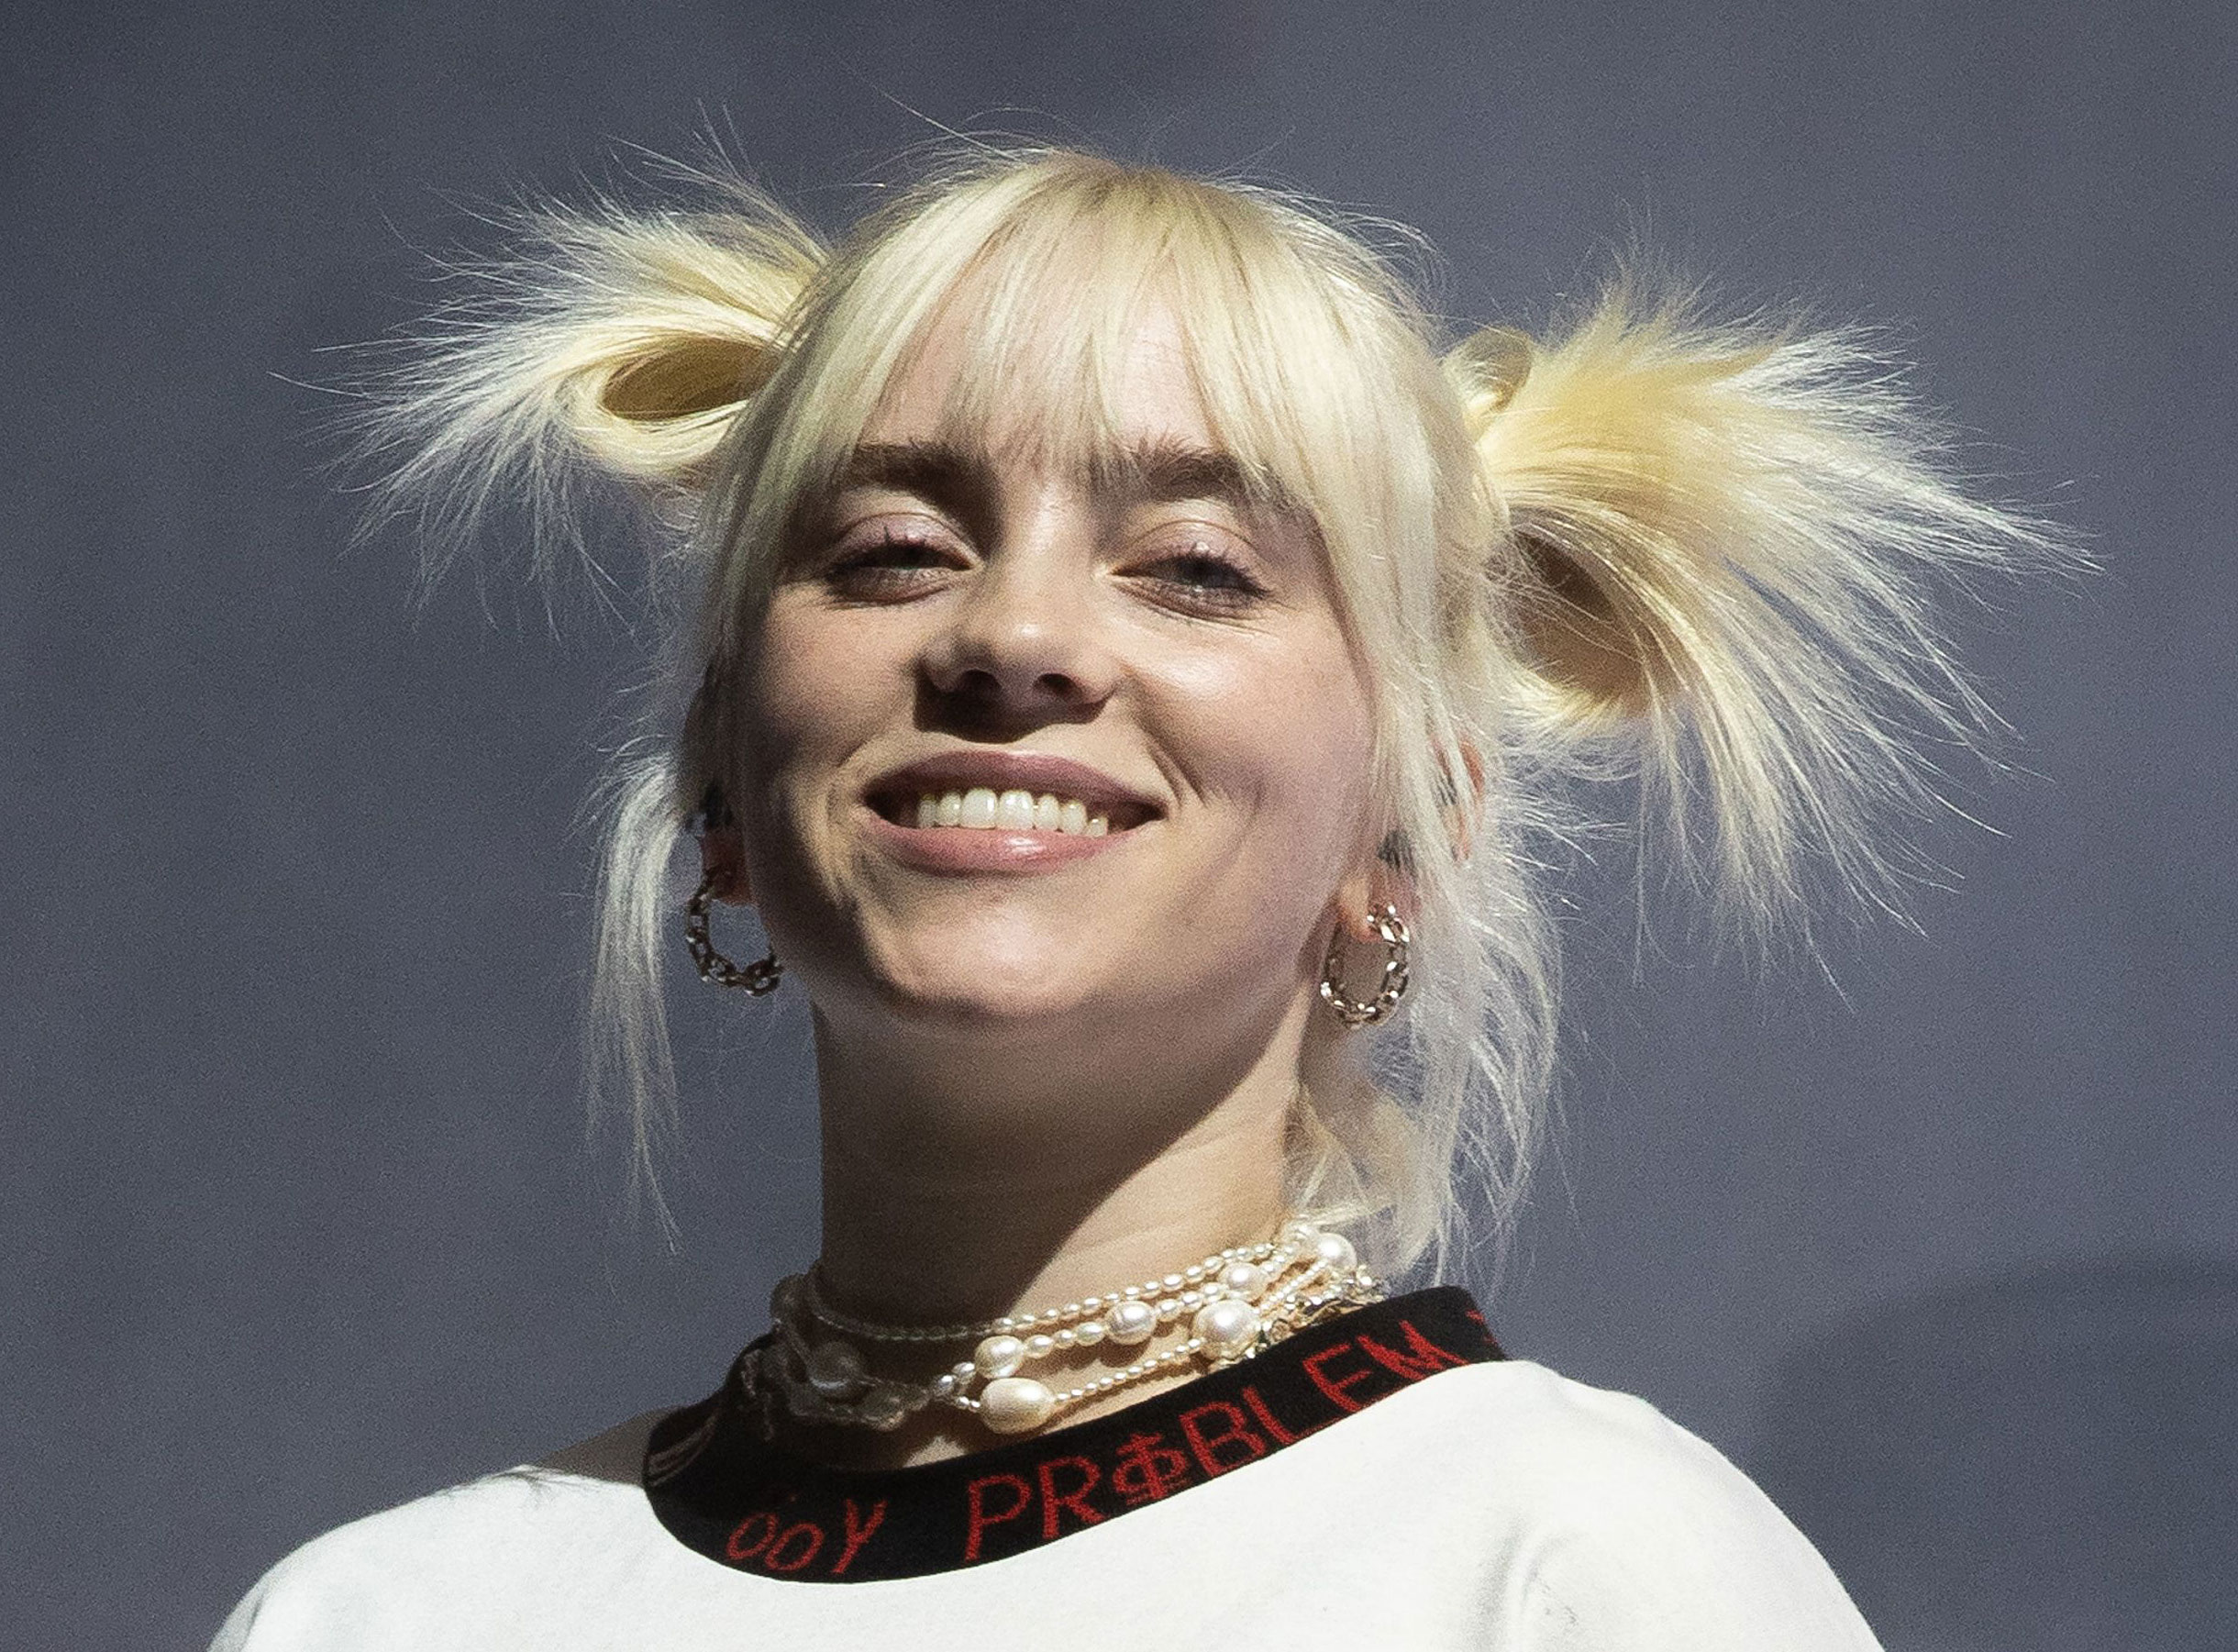 Billie Eilish Goes Blonde and Fans Are Loving It - wide 8